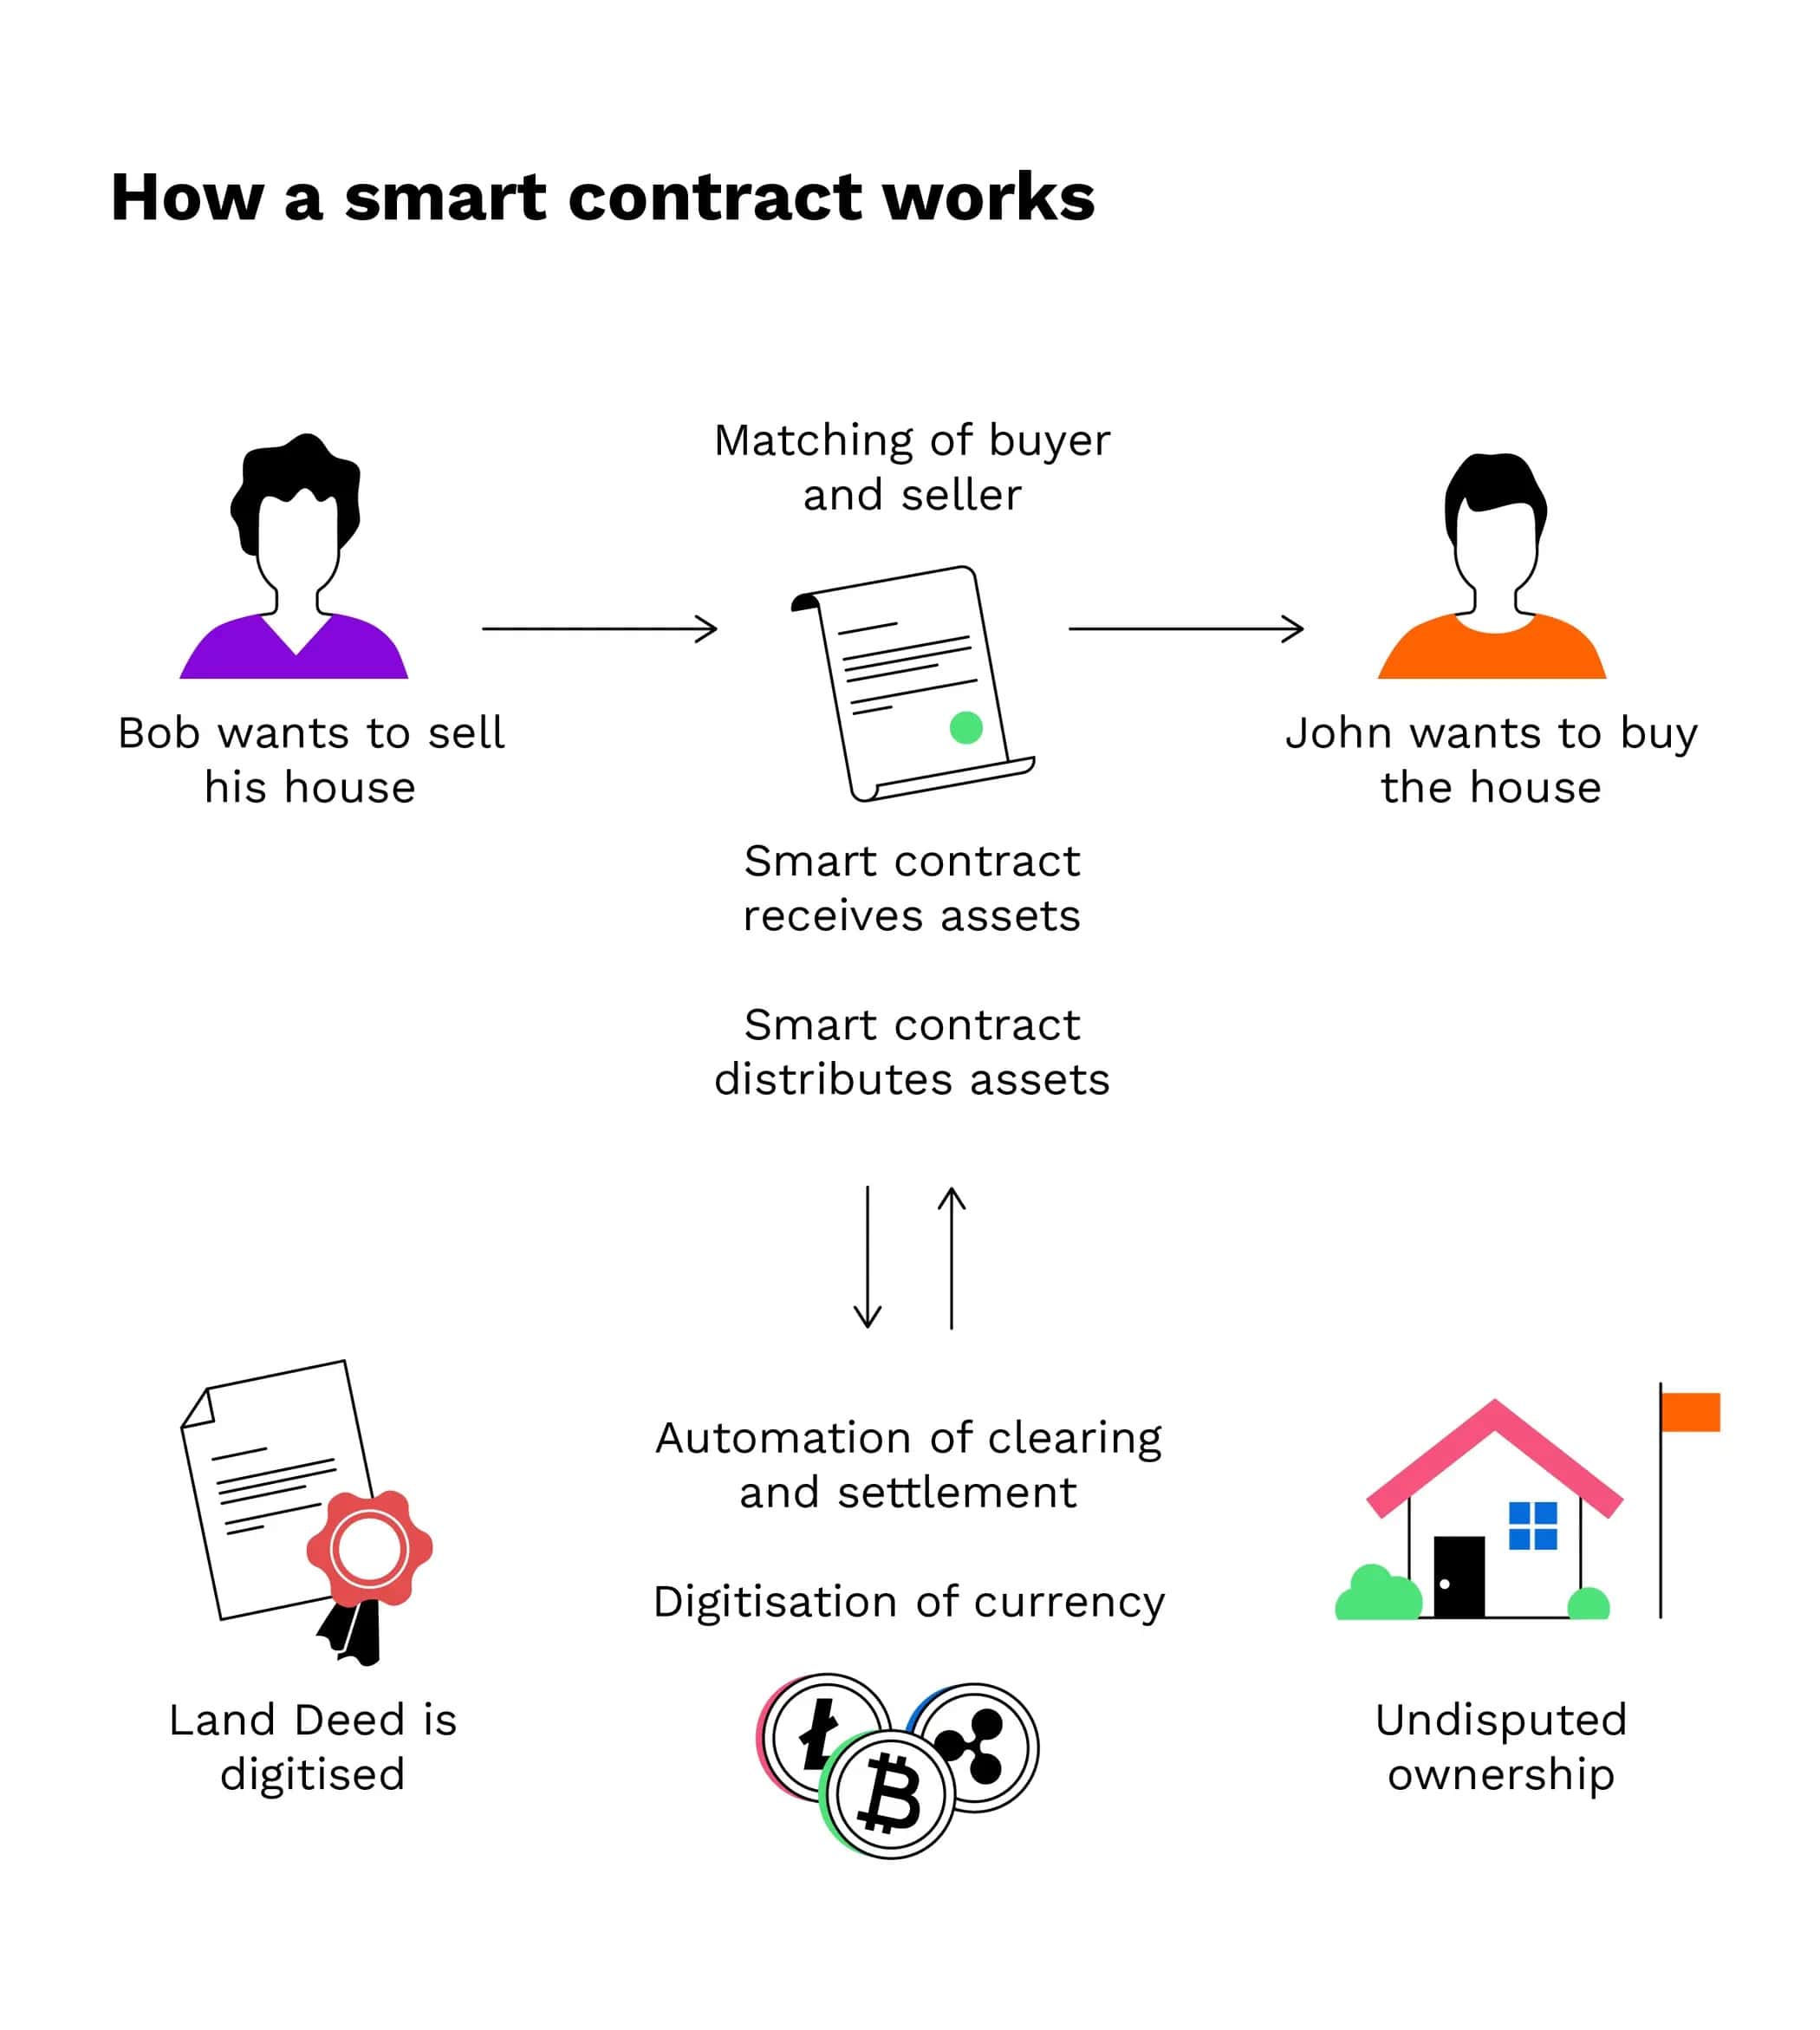 Smart contracts: General view